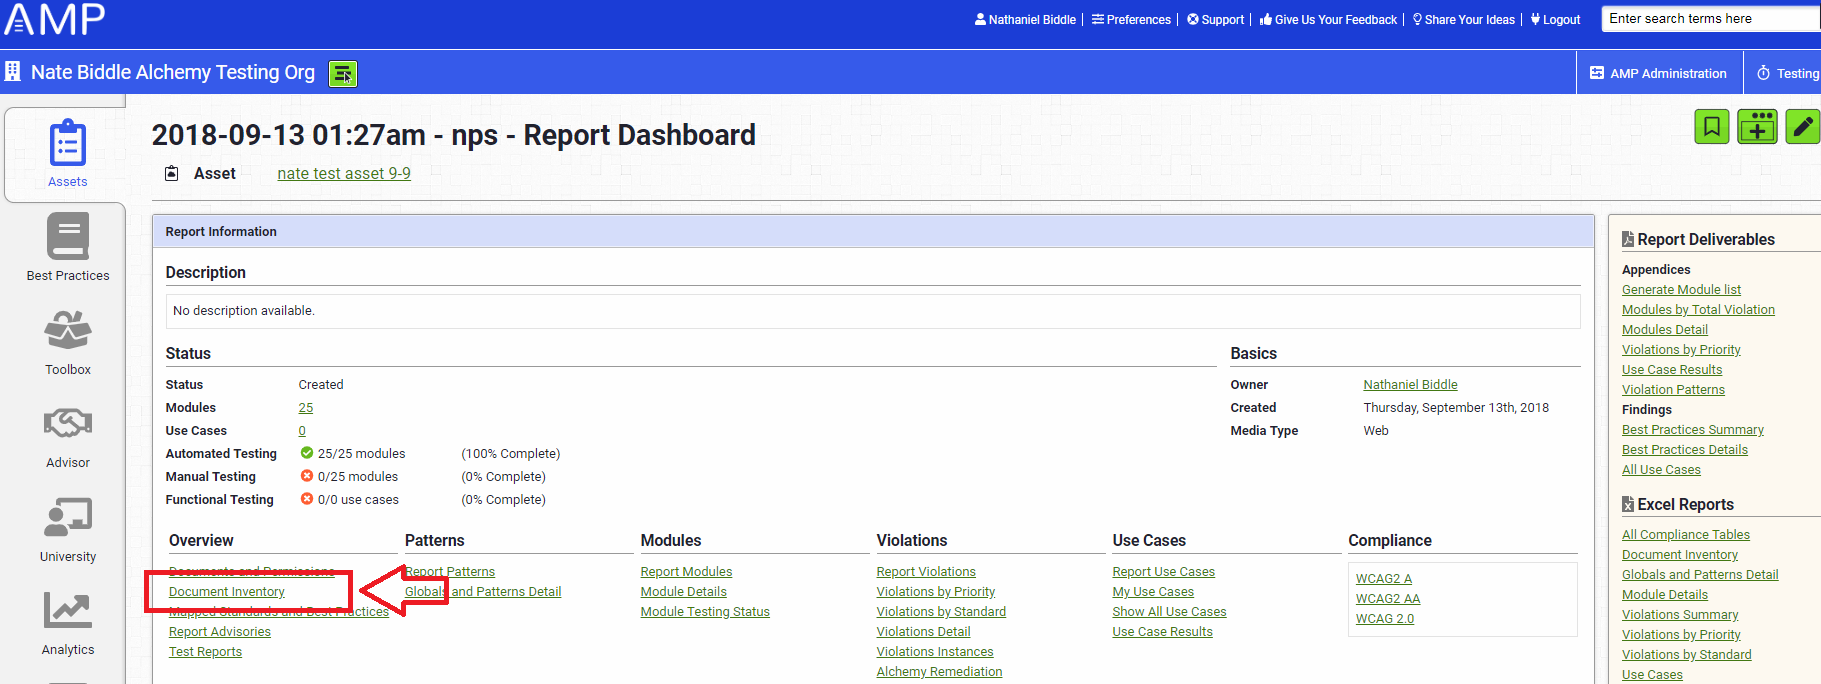 AMP dashboard advanced view, shows the location of Document inventory.